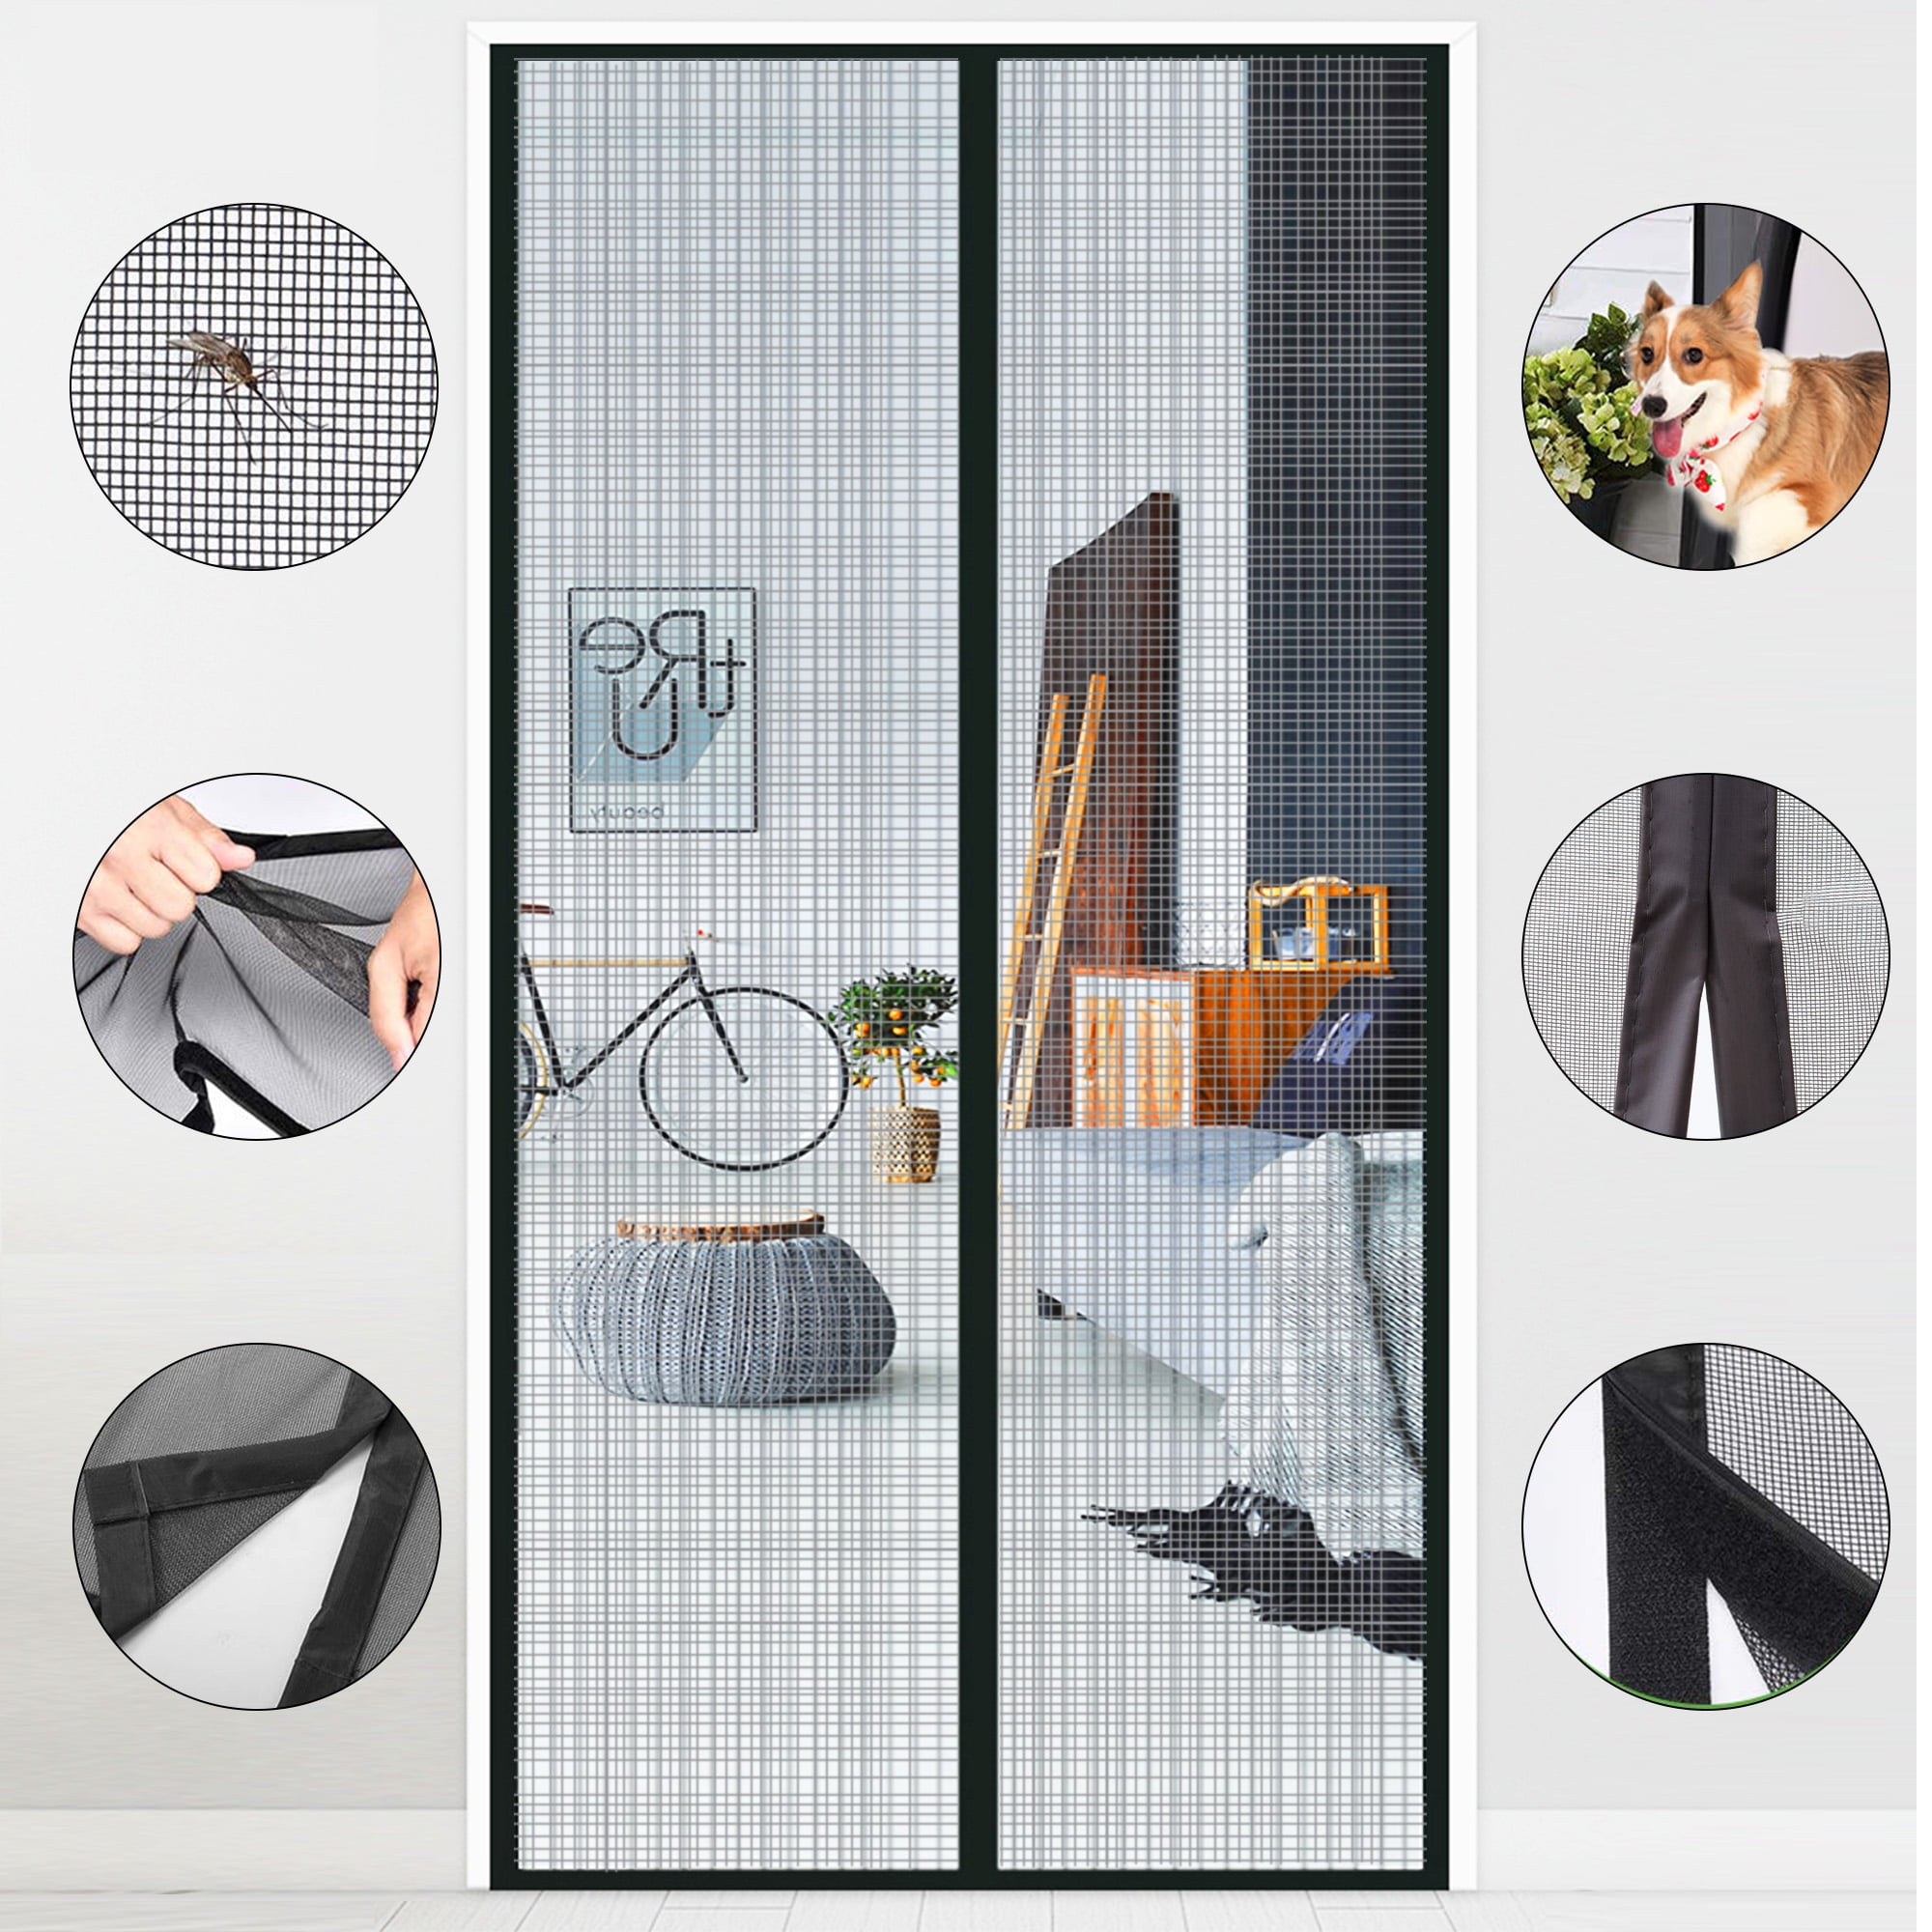 Fits Doors Up to 34 x 82 Max Magnetic Screen Door with Full Frame Hook & Loop Durable Mesh Keep Bug Fly Mosquito Out and Close Automatically